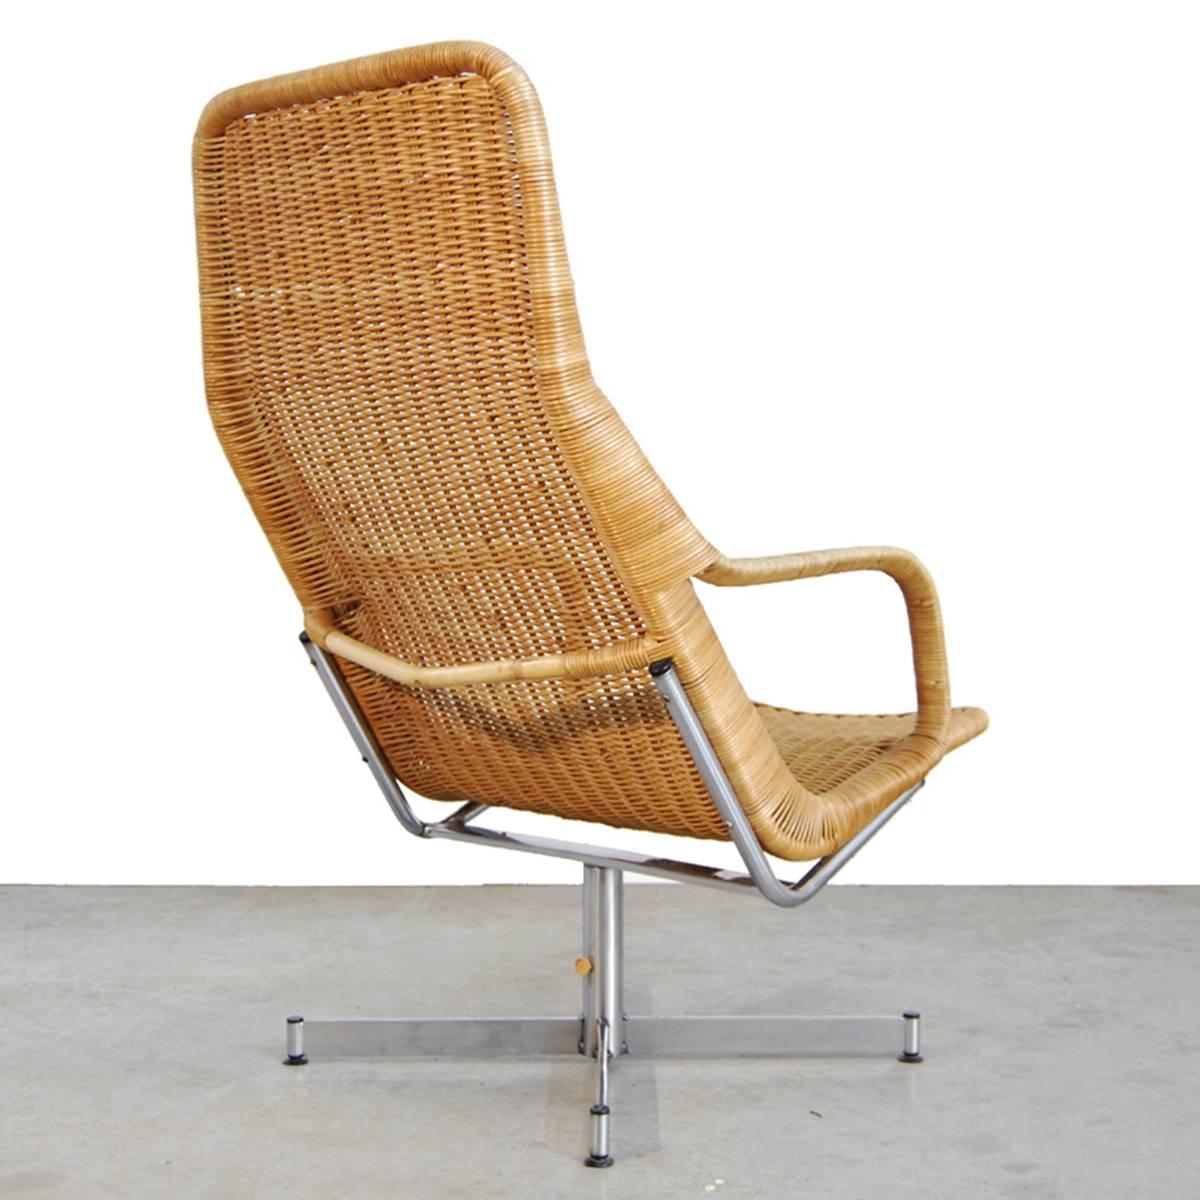 Elegant lounge chair by Dirk van Sliedregt for Gebroeders Jonkers, Noordwolde, Netherlands 1961. Rattan seating with chrome-plated metal frame. Good original condition with light traces of use.